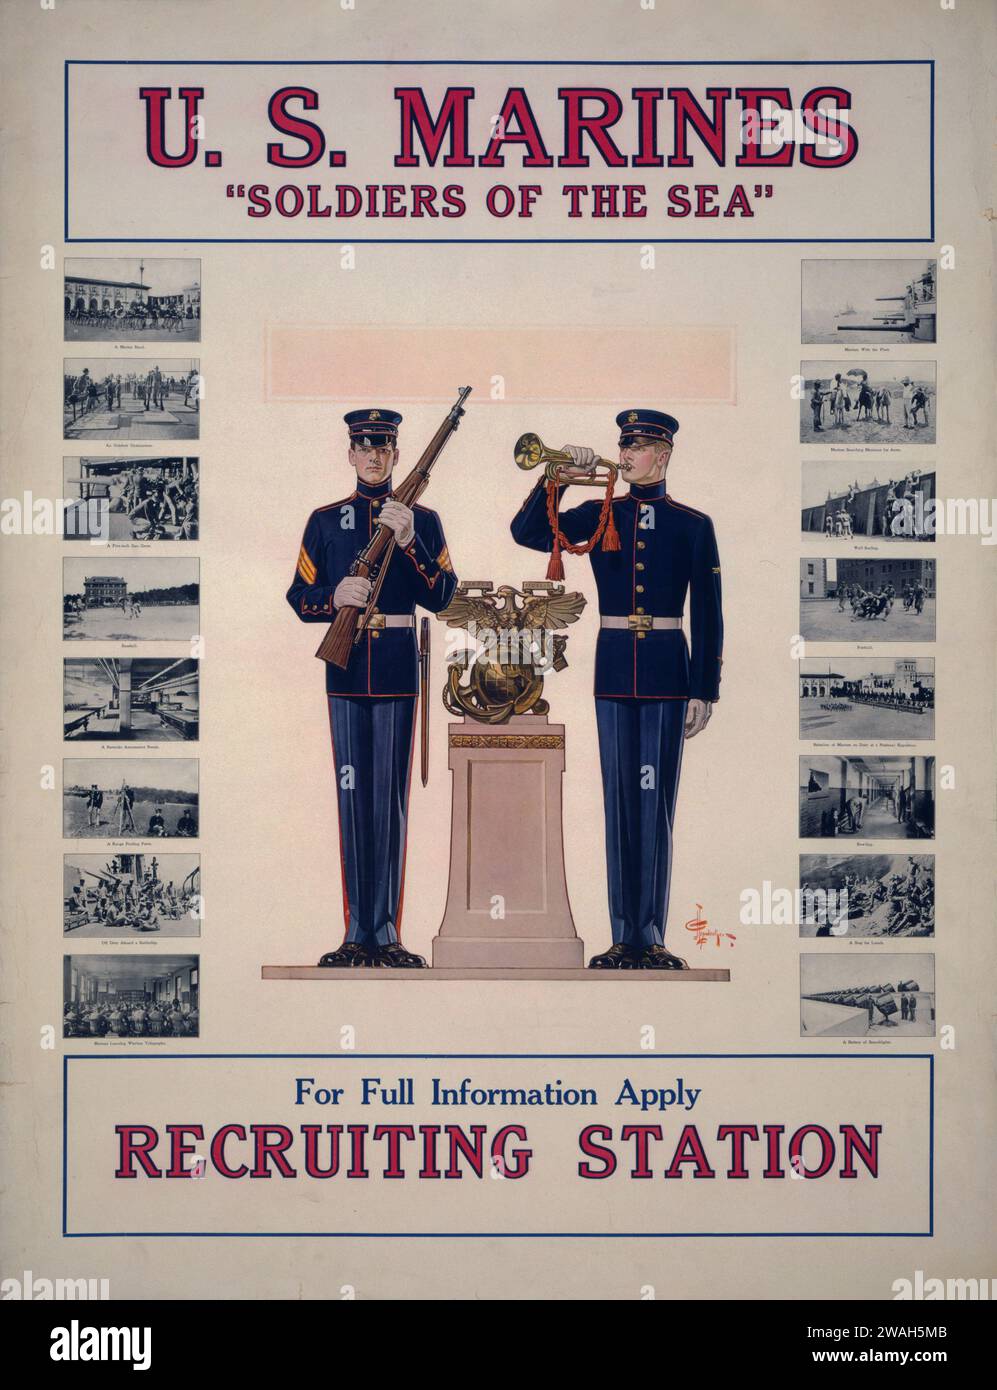 Vintage U.S. Marines recruitment poster with two uniformed soldiers, one with a rifle and one with a trumpet, titled 'Soldiers of the Sea.' Stock Photo